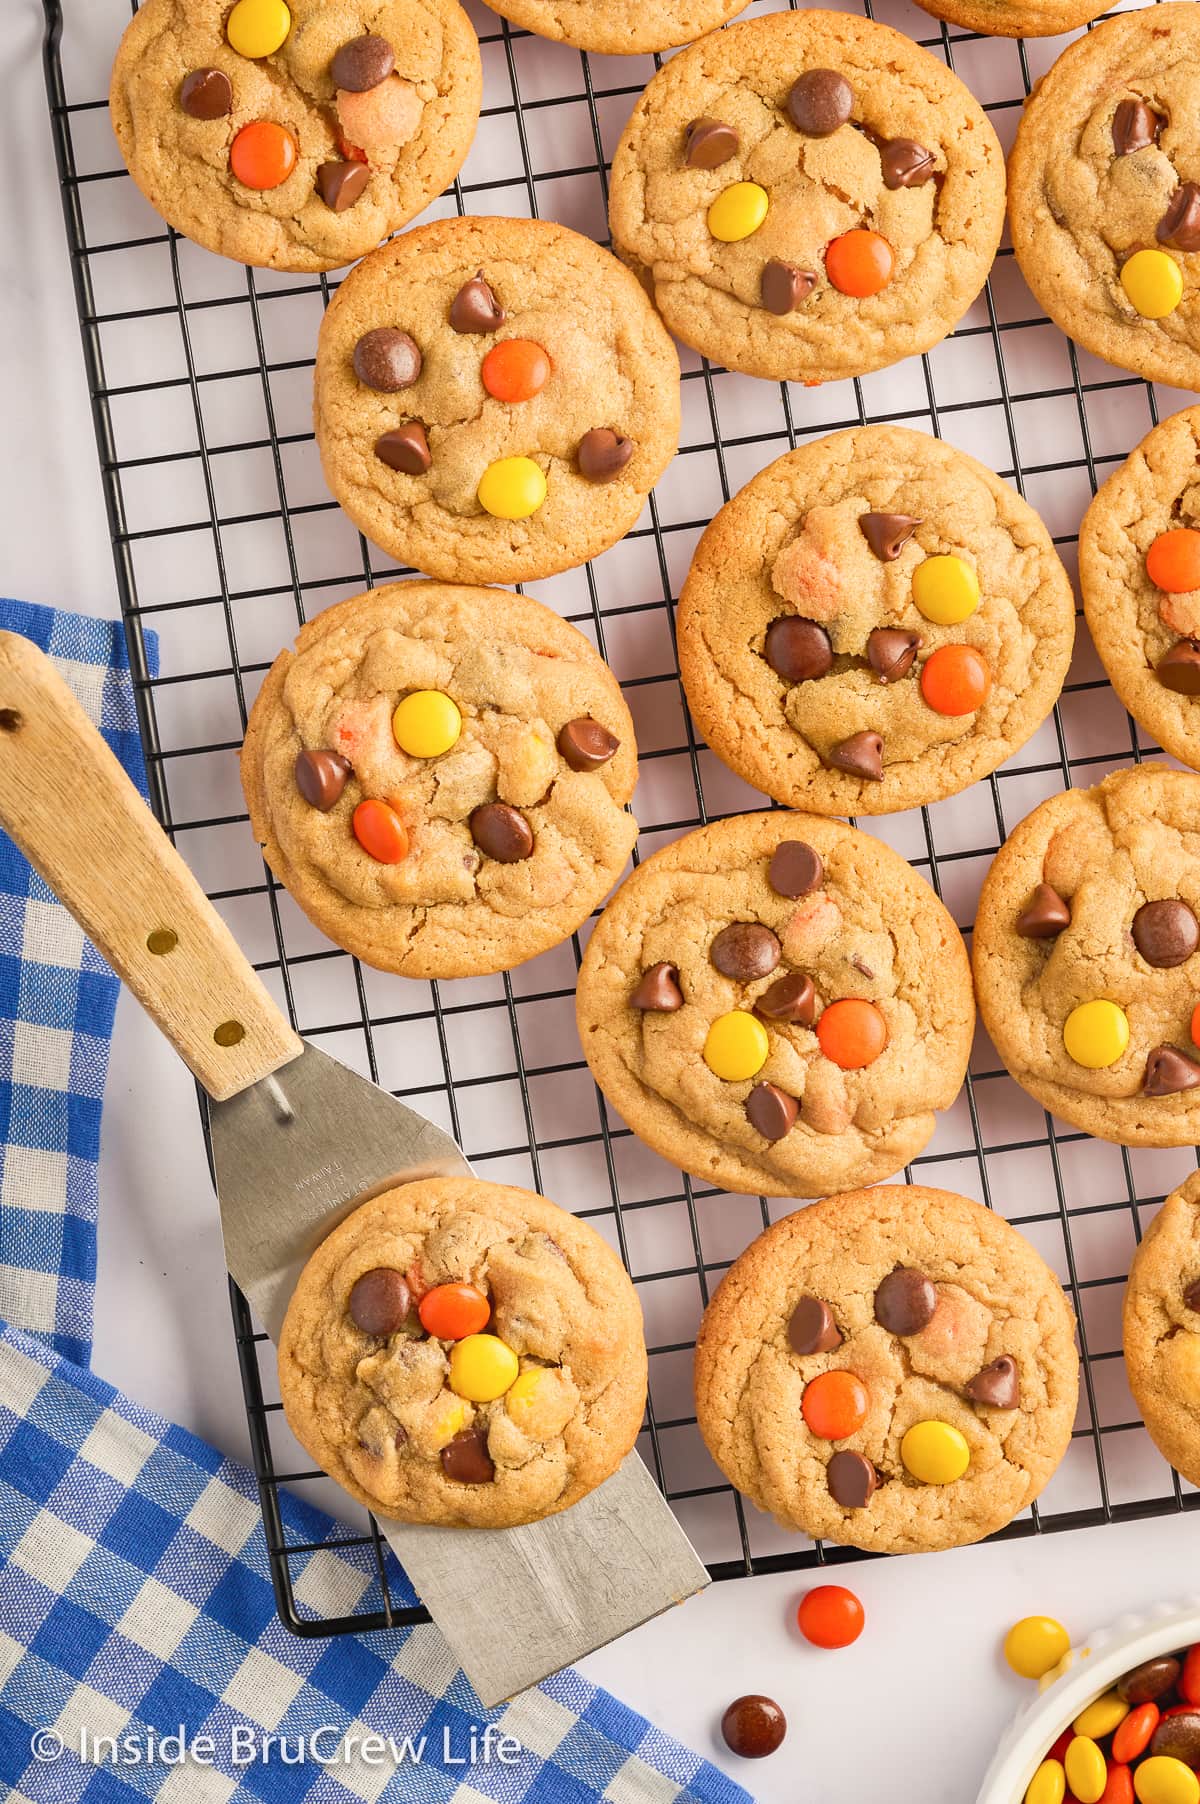 Cookies on a wire rack topped with Reese's Pieces candies.